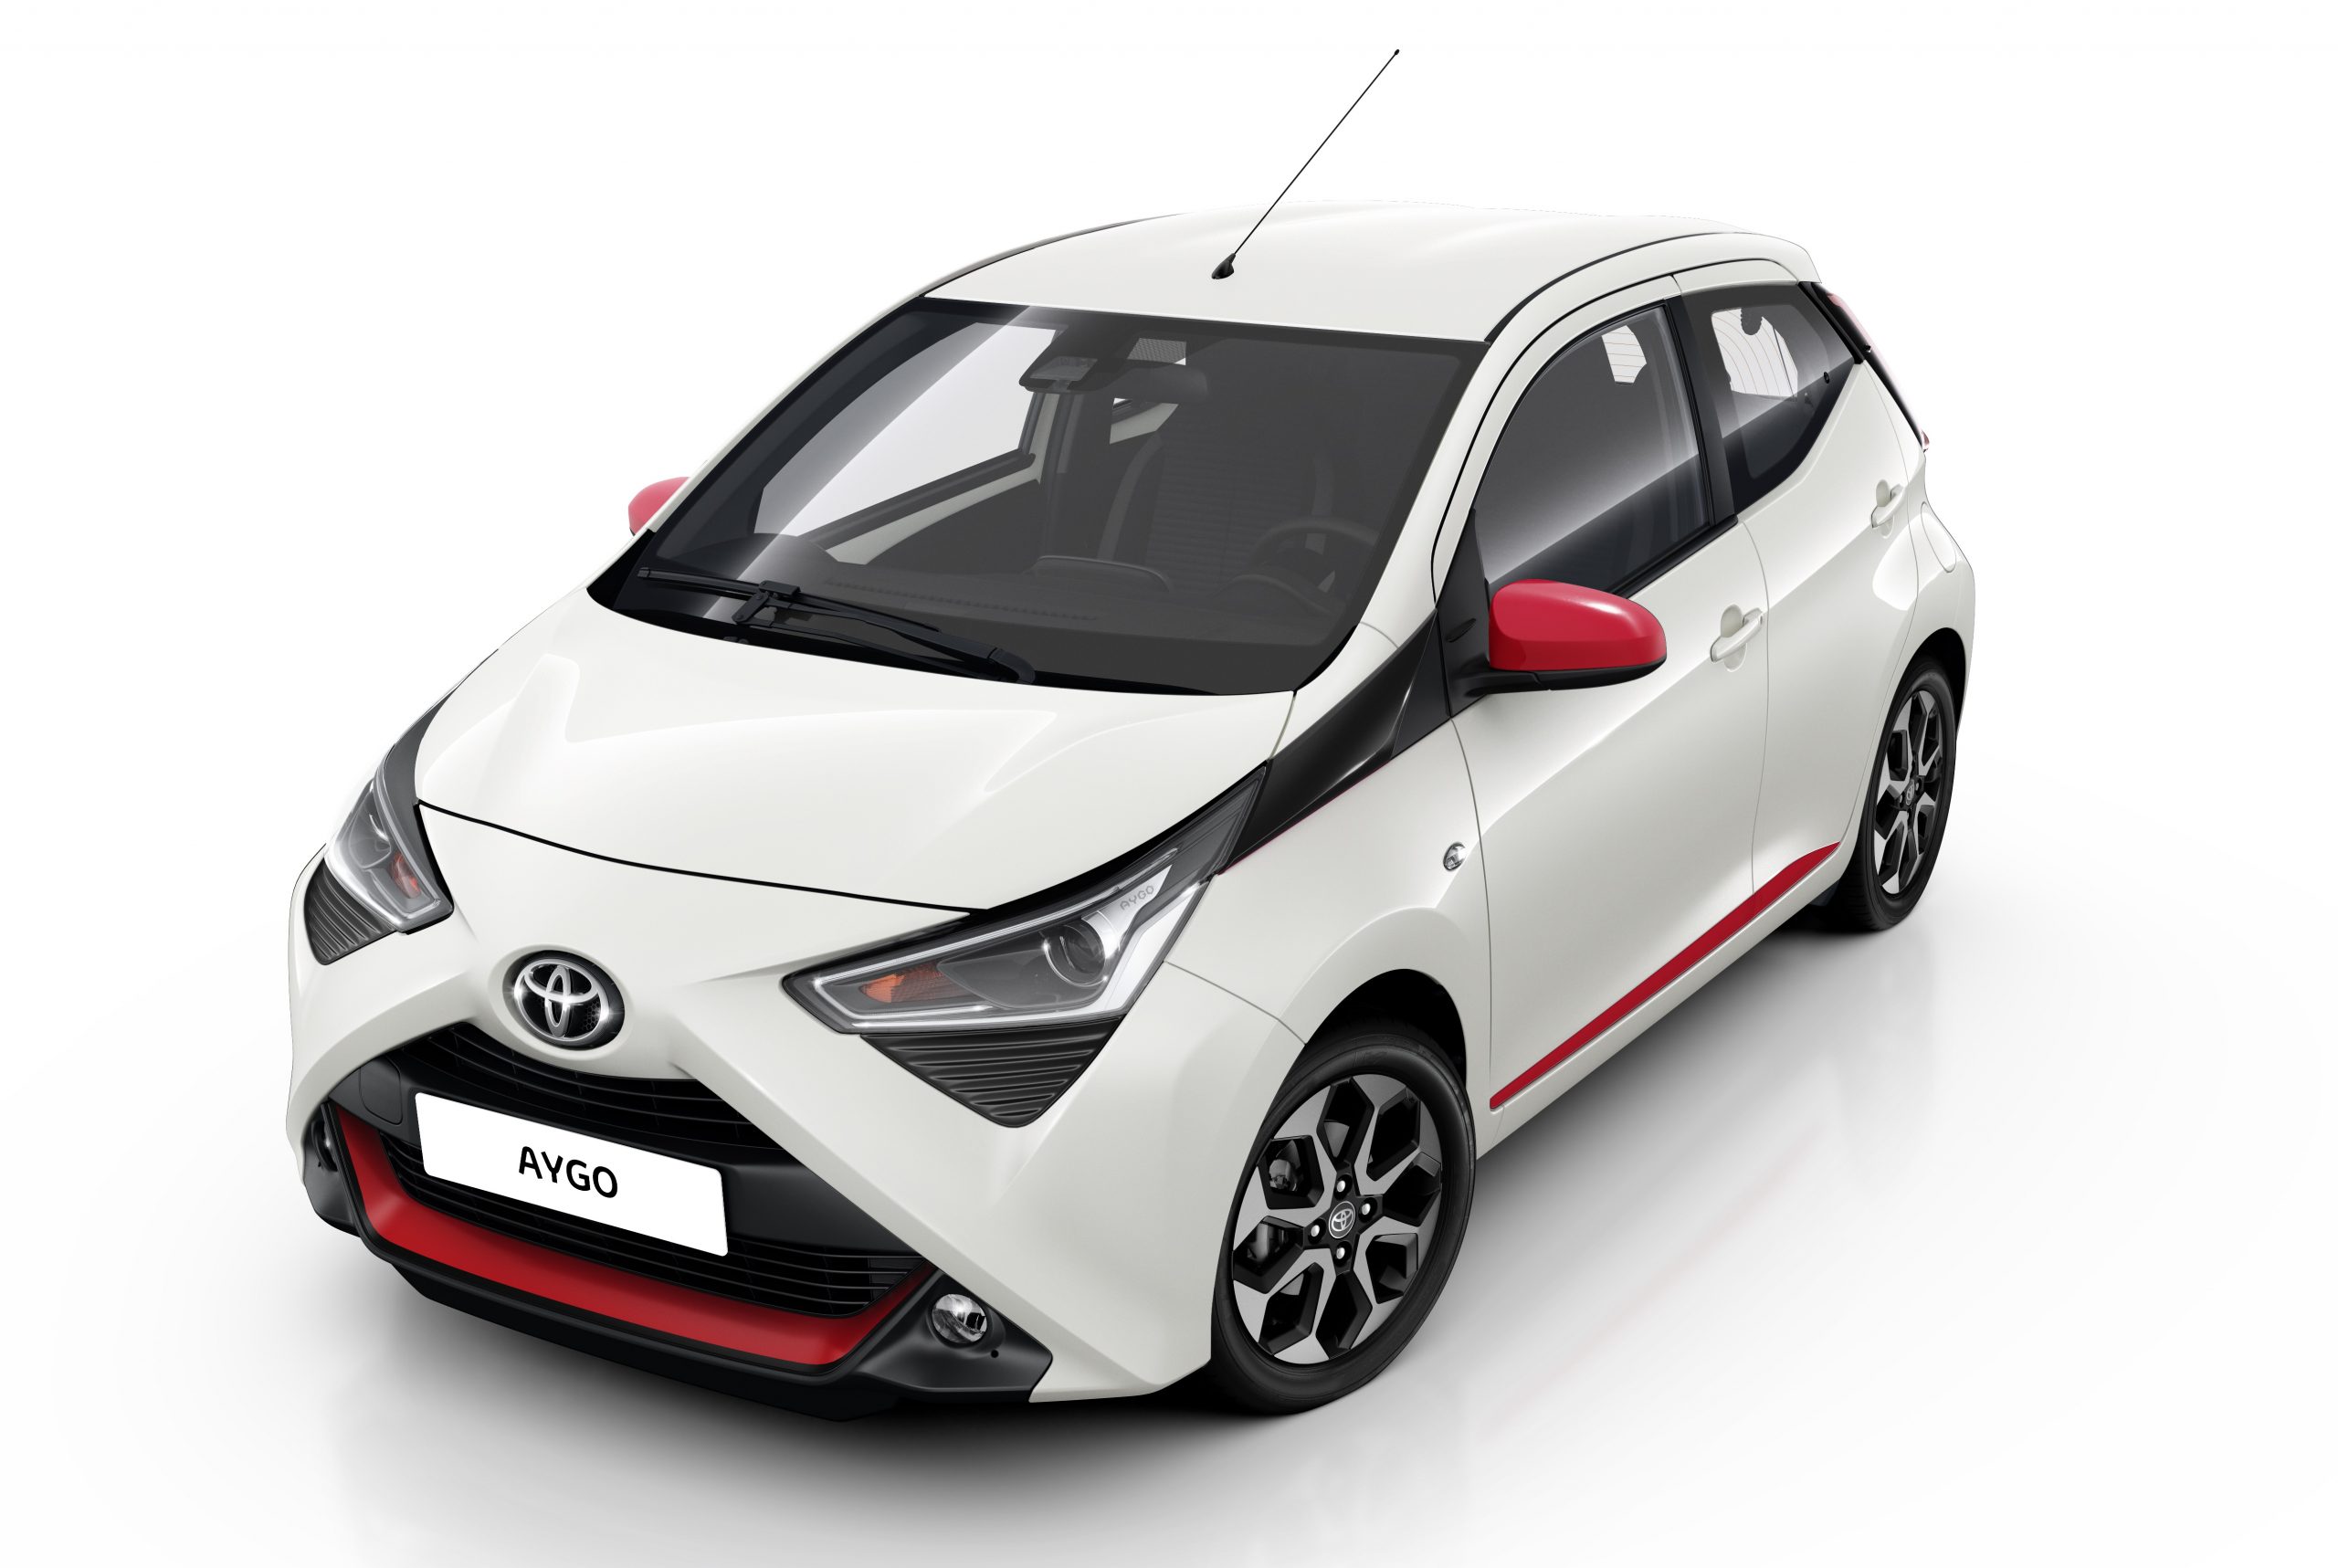 Distrahere at donere Marvel Toyota Fashions New Aygo Line-Up With x-trend - Toyota Media Site